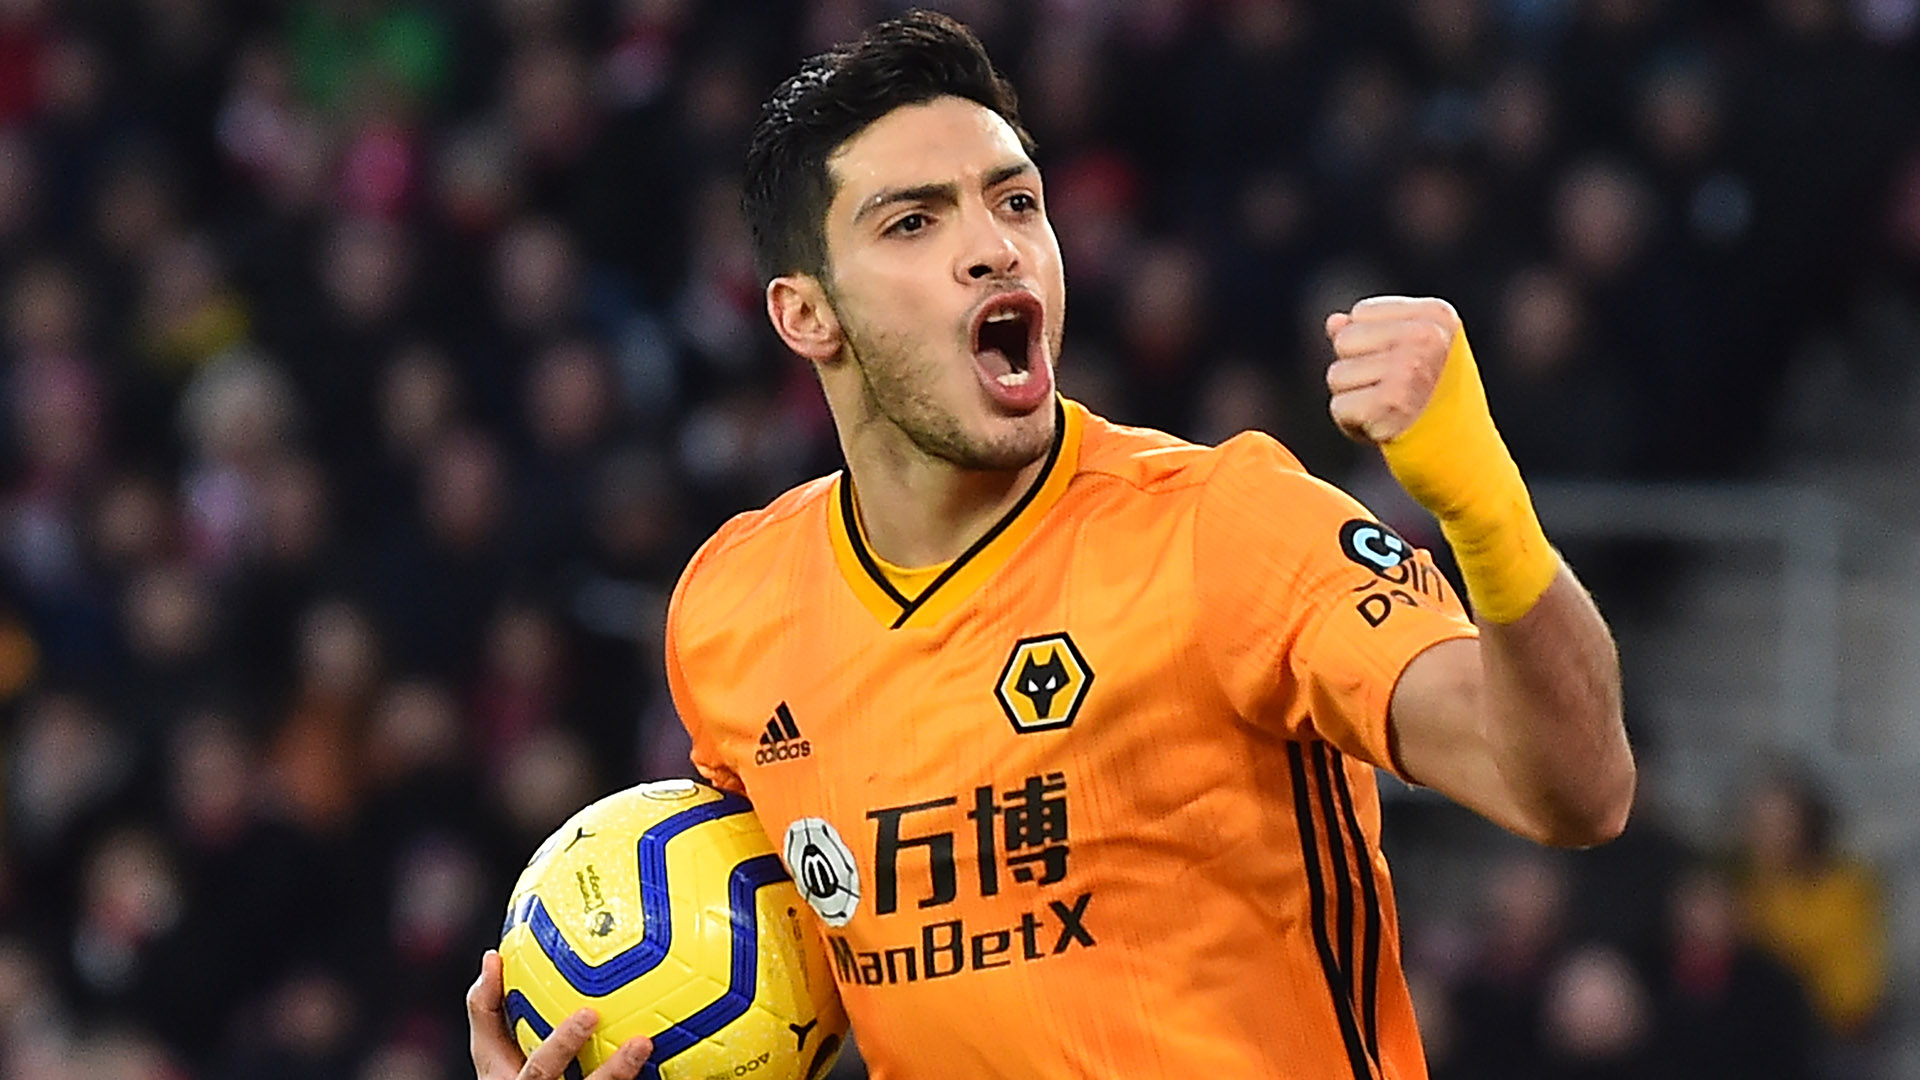 'I can imagine Jimenez playing with Man City' - Gundogan says Wolves star good enough for Guardiola's side